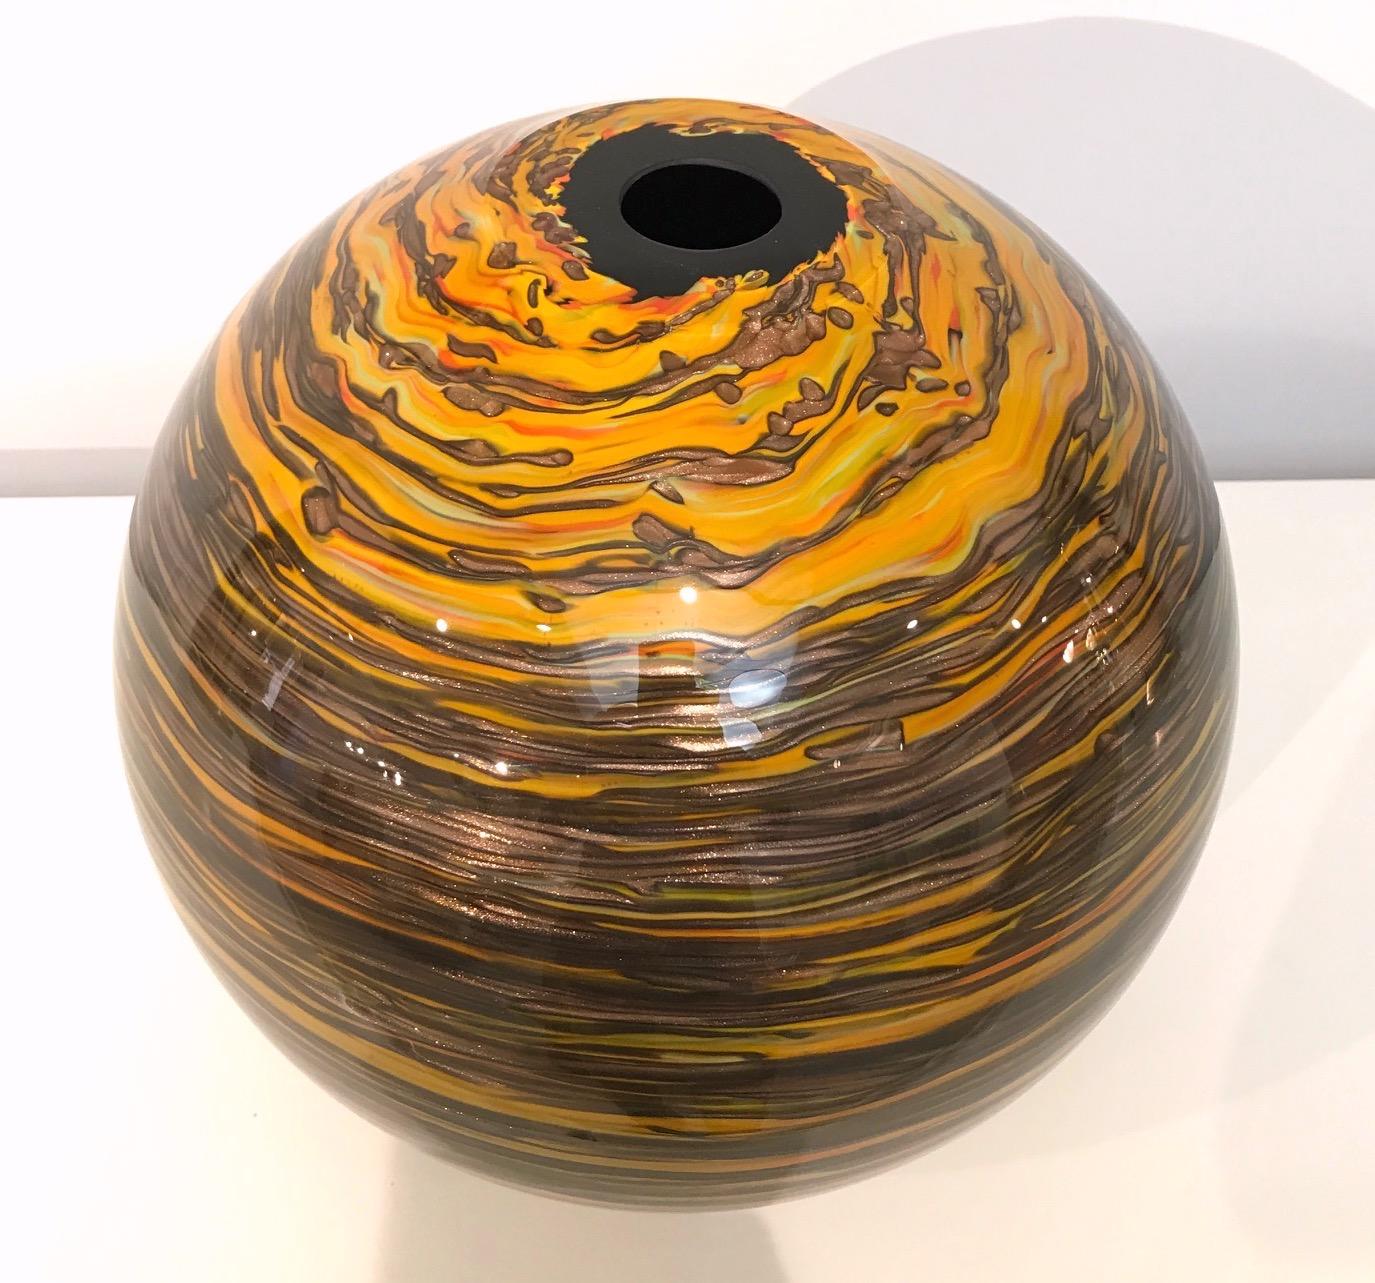 Formia 1980s Modern Round Brown Yellow Red Orange Gold Murano Glass Vase For Sale 5